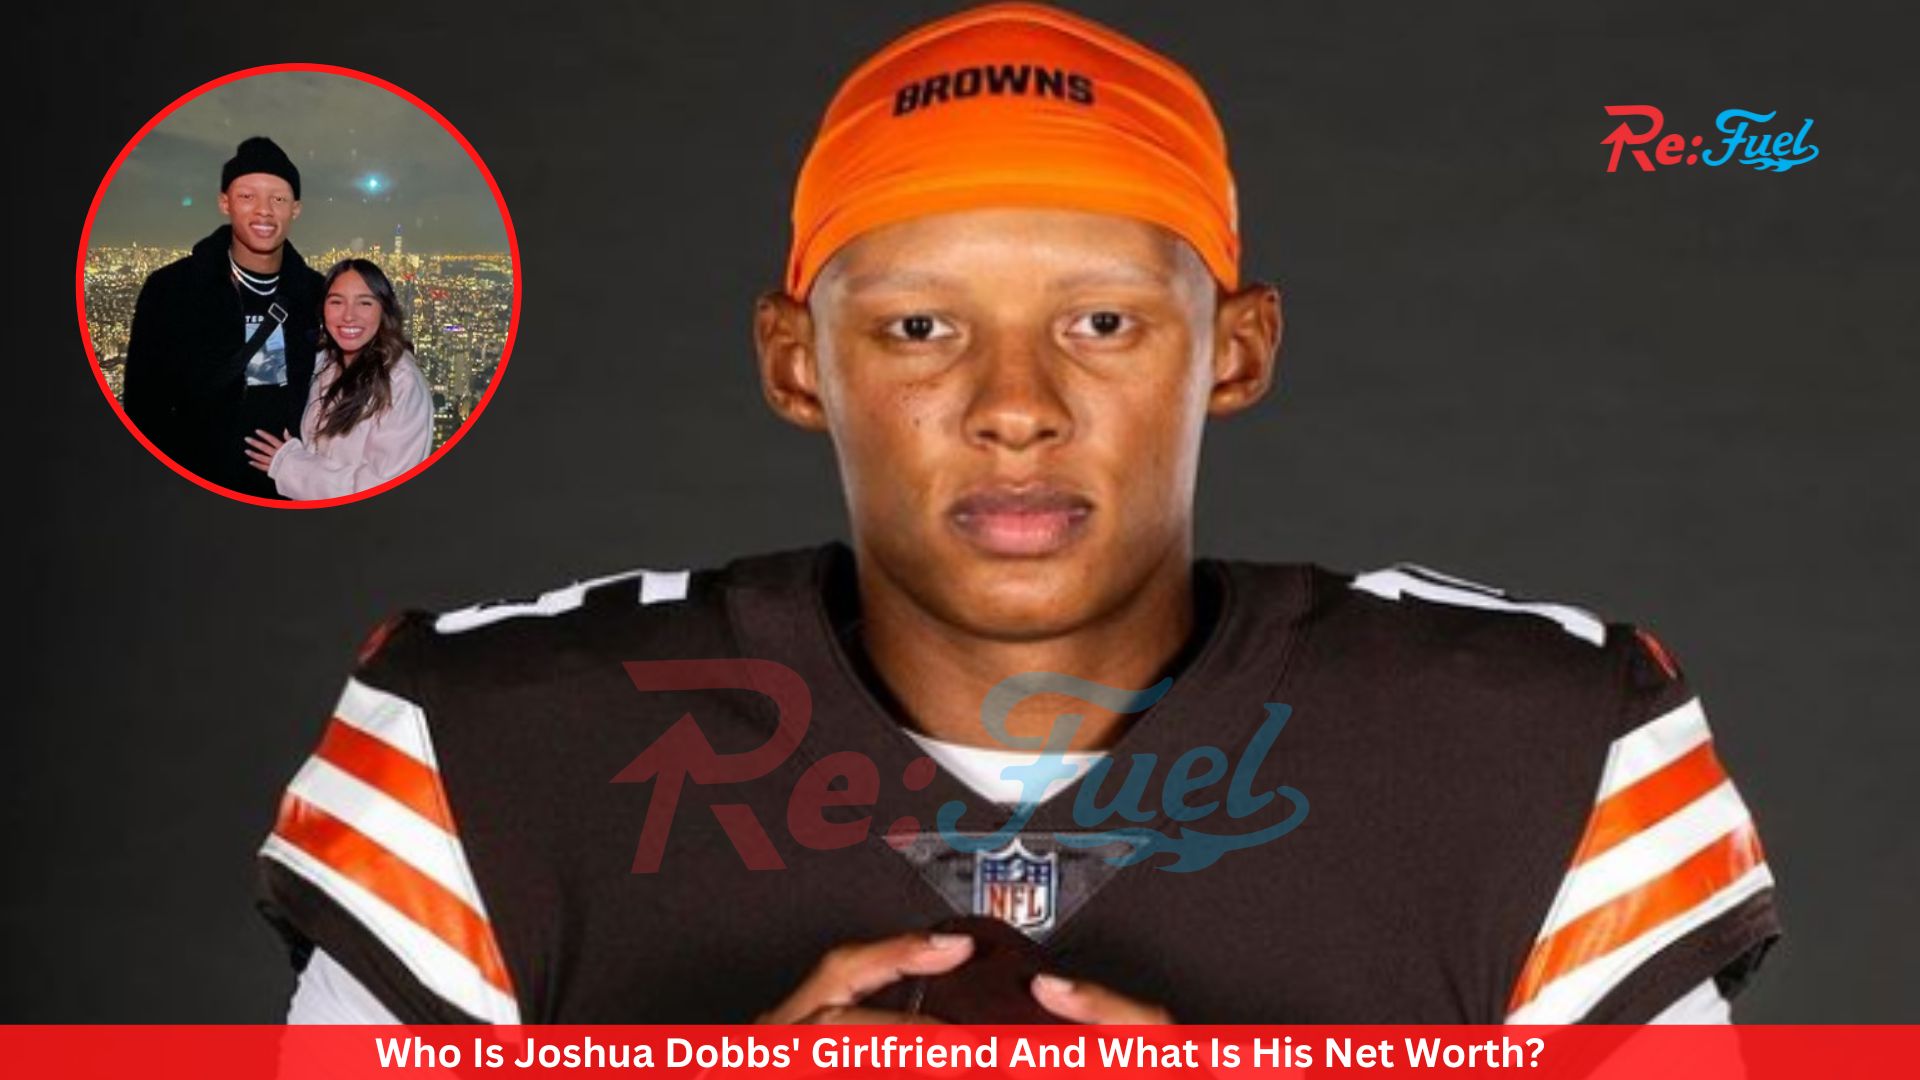 Who Is Joshua Dobbs' Girlfriend And What Is His Net Worth?